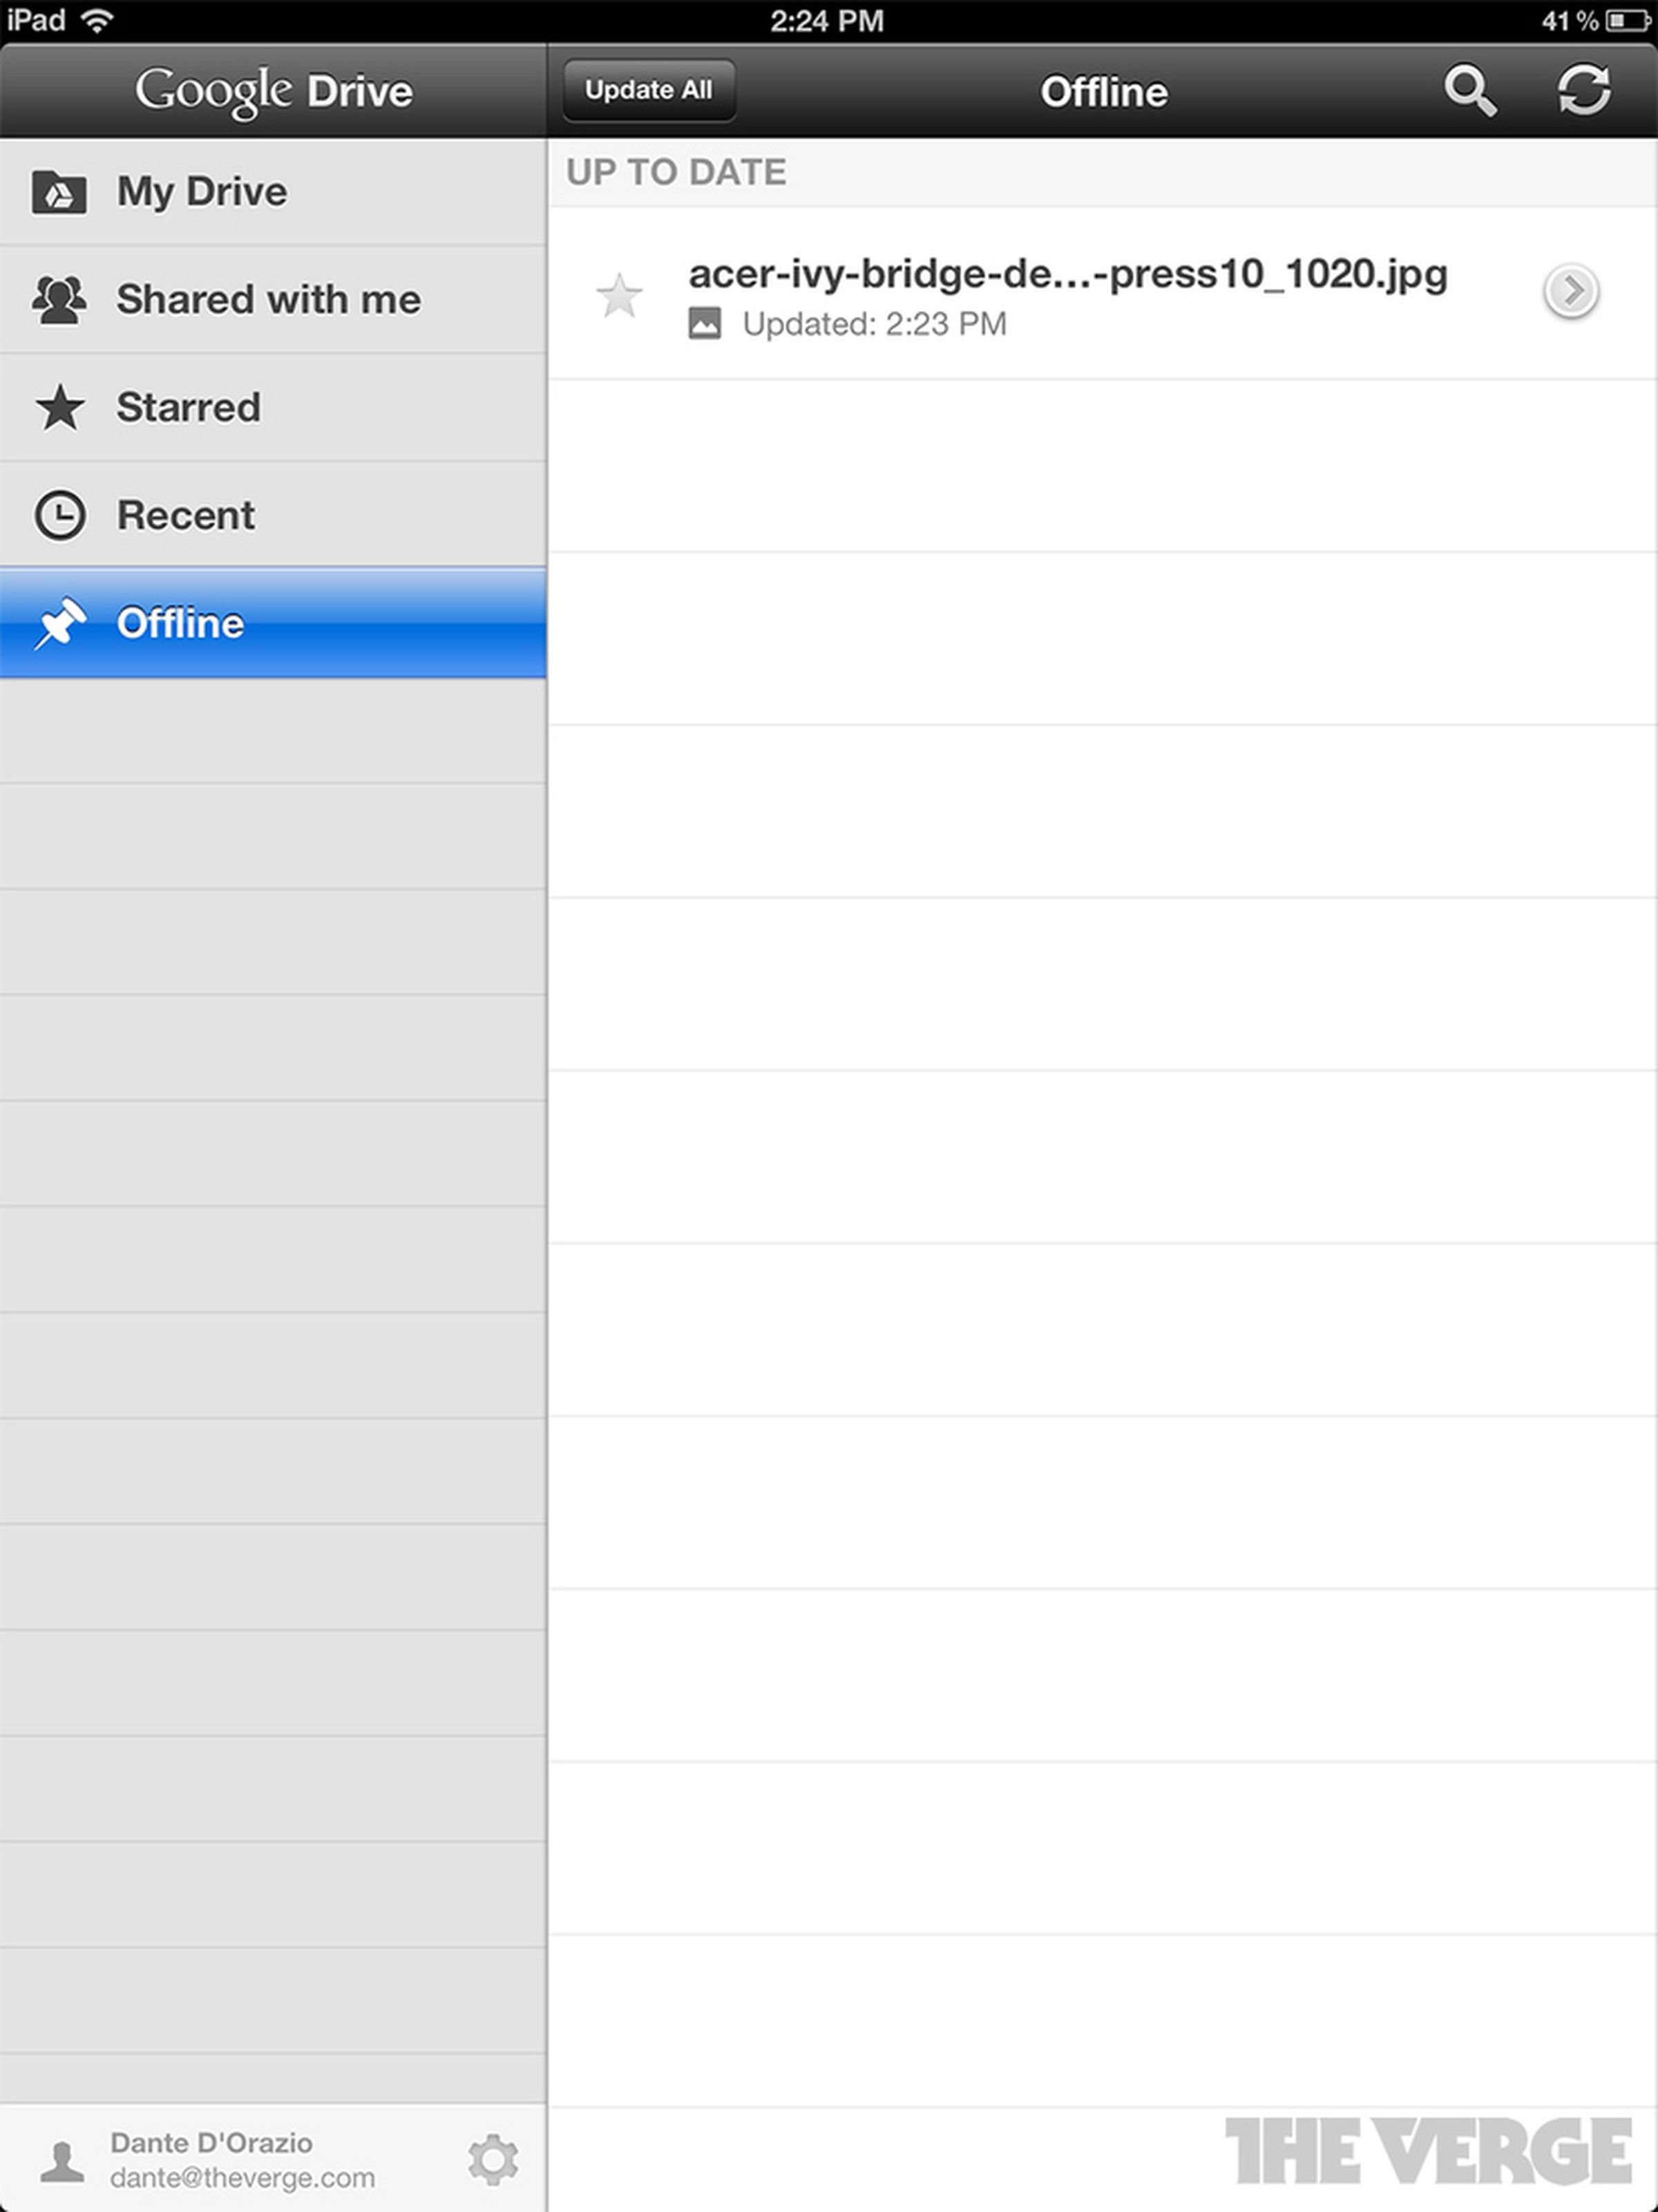 Google Drive for iPad hands-on pictures